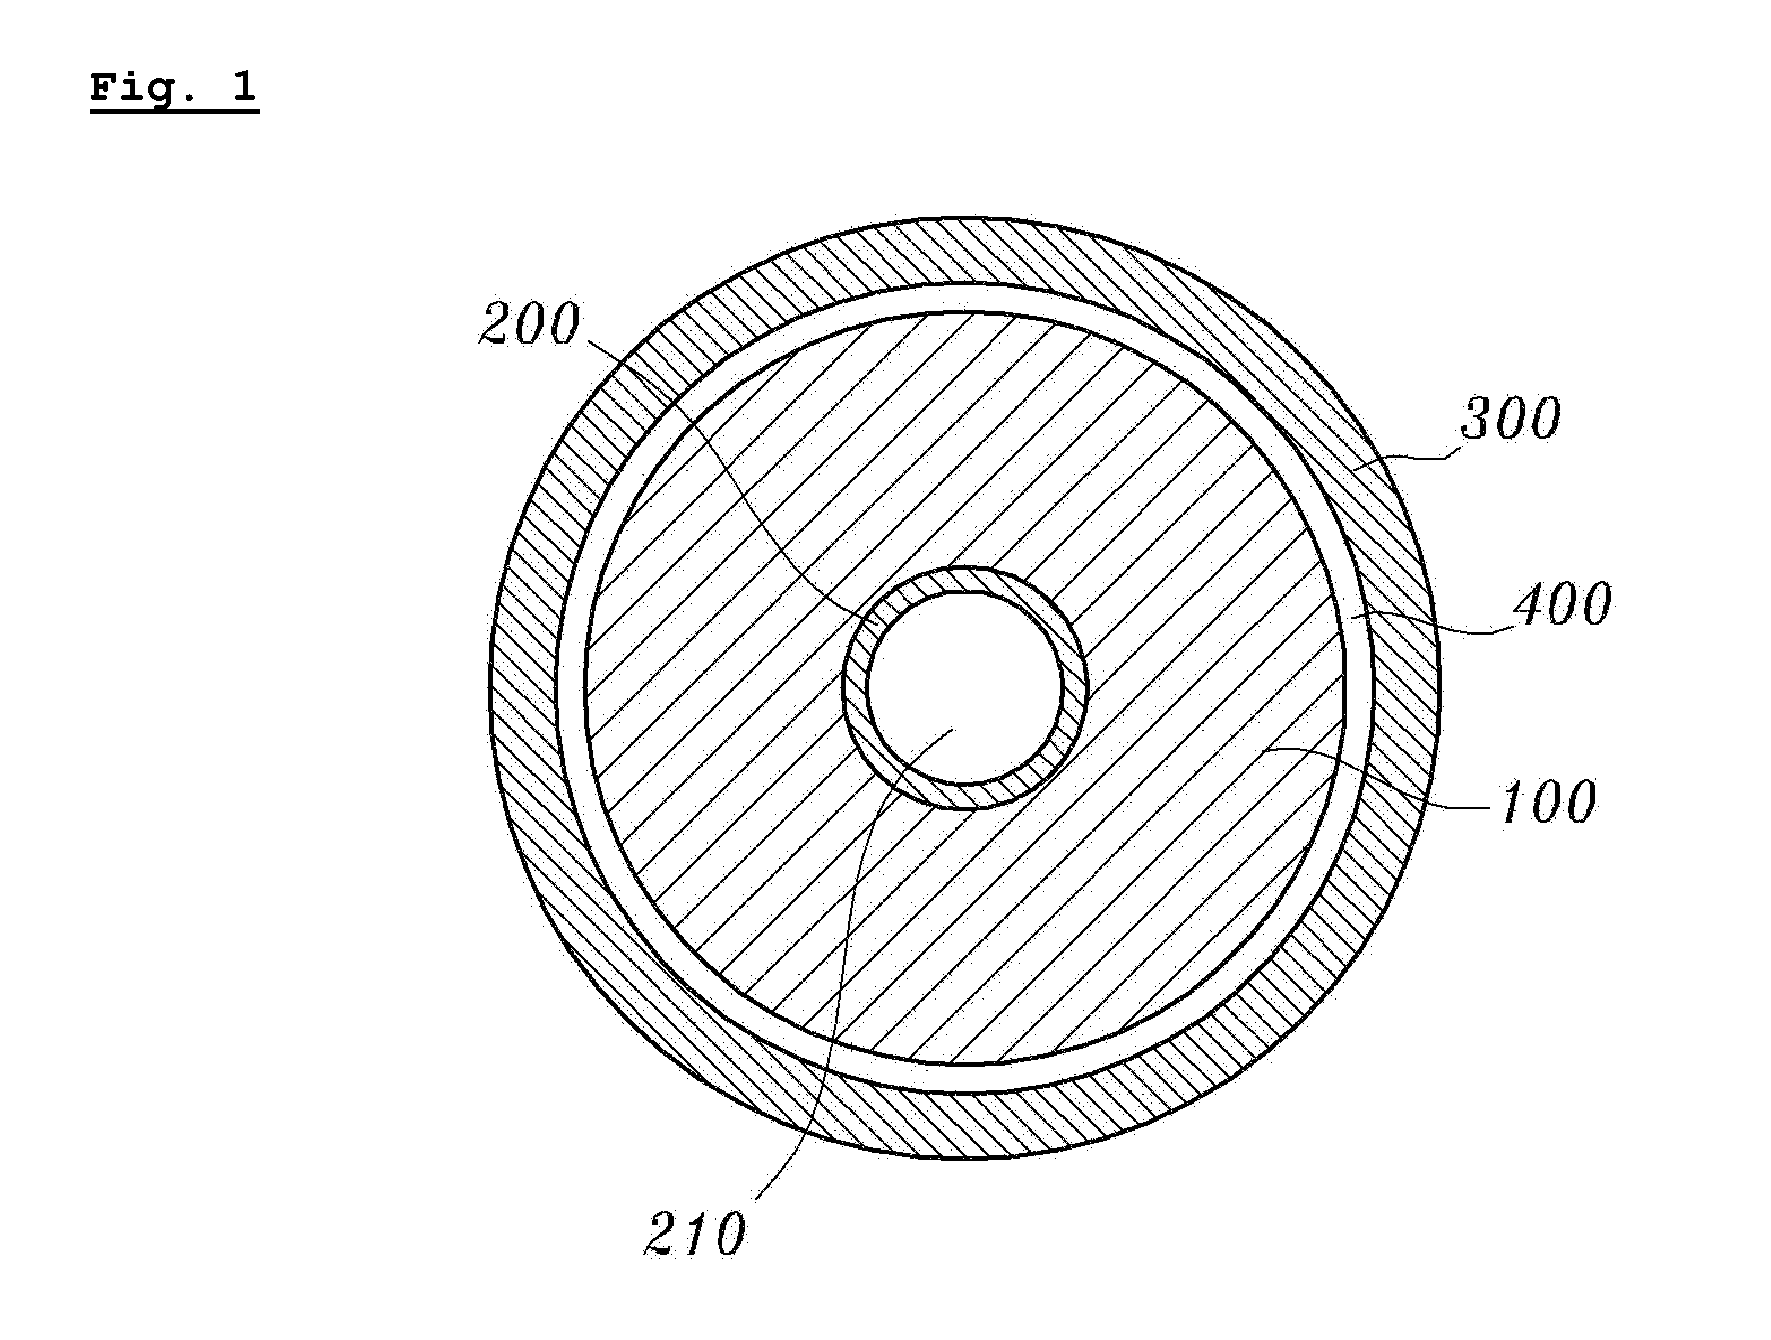 Nuclear fuel rod for fast reactor